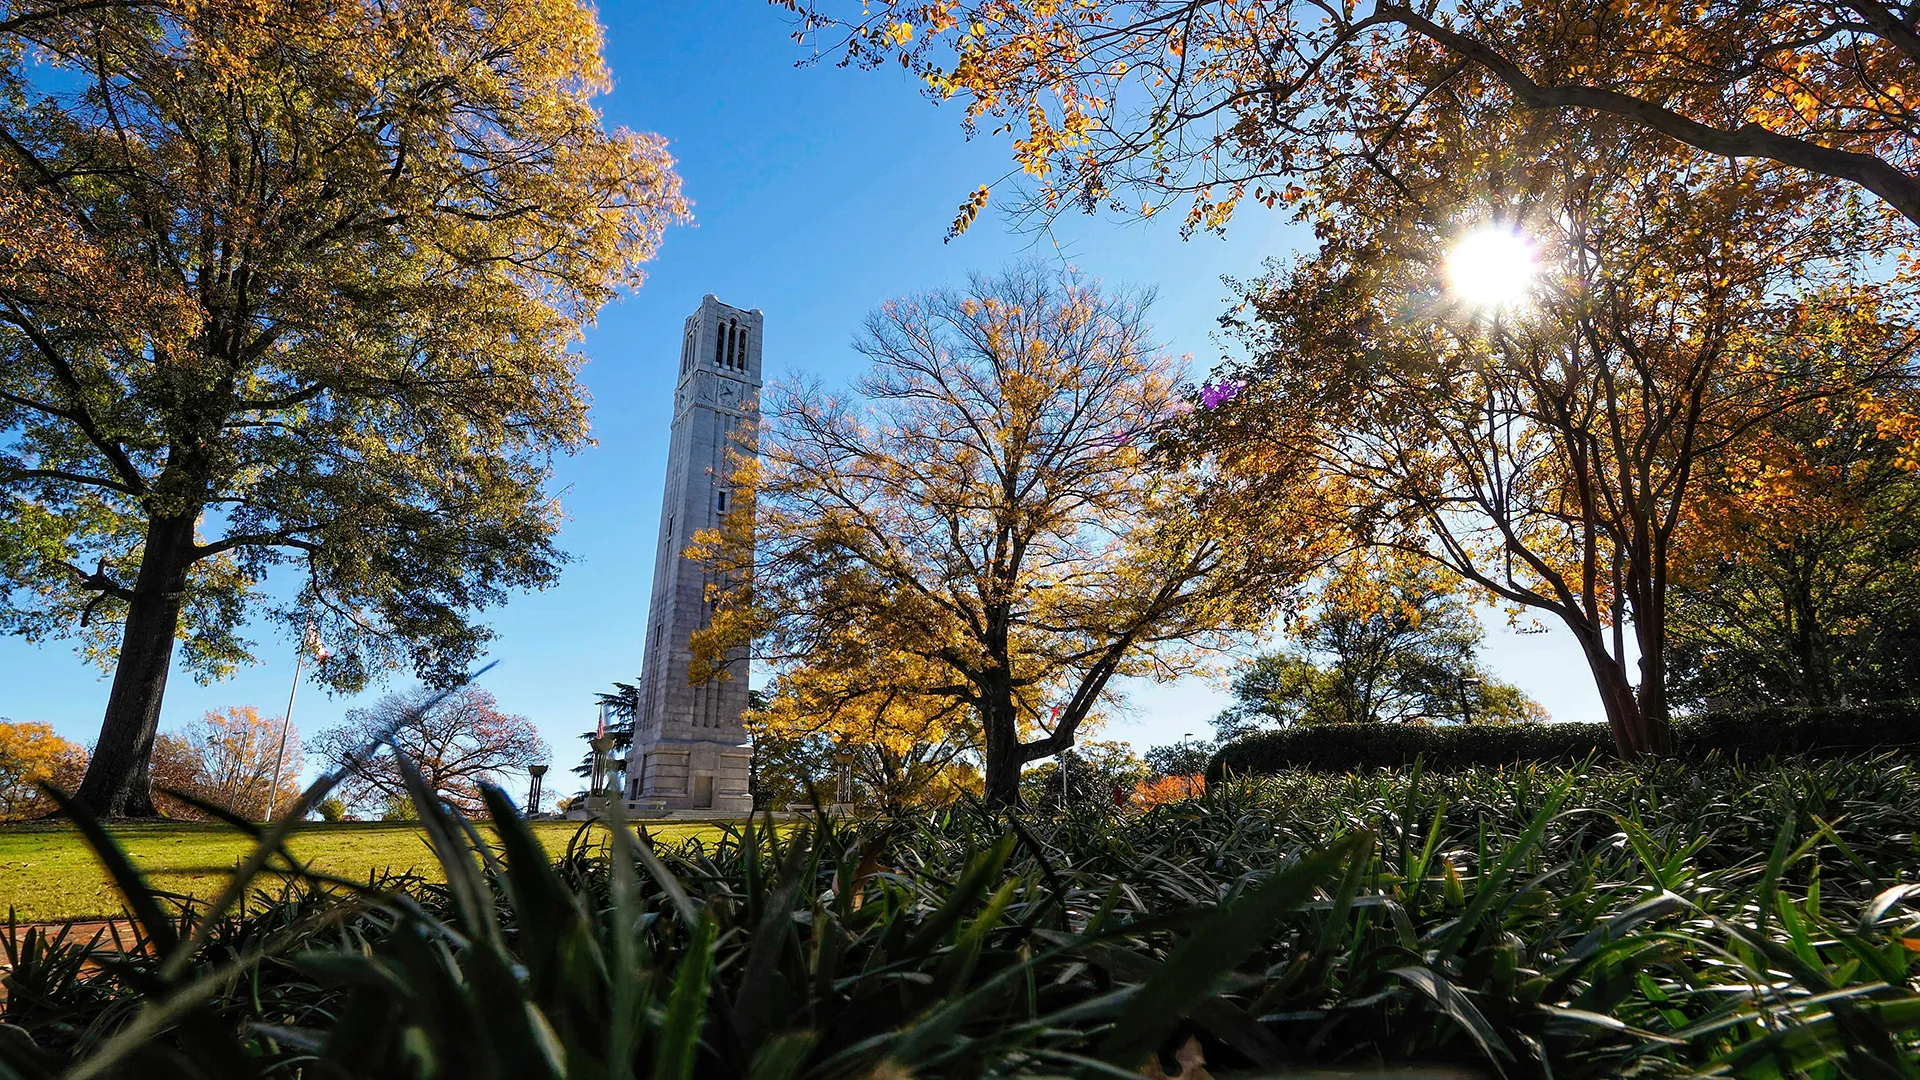 The Memorial Belltower at NC State, surrounded by trees.